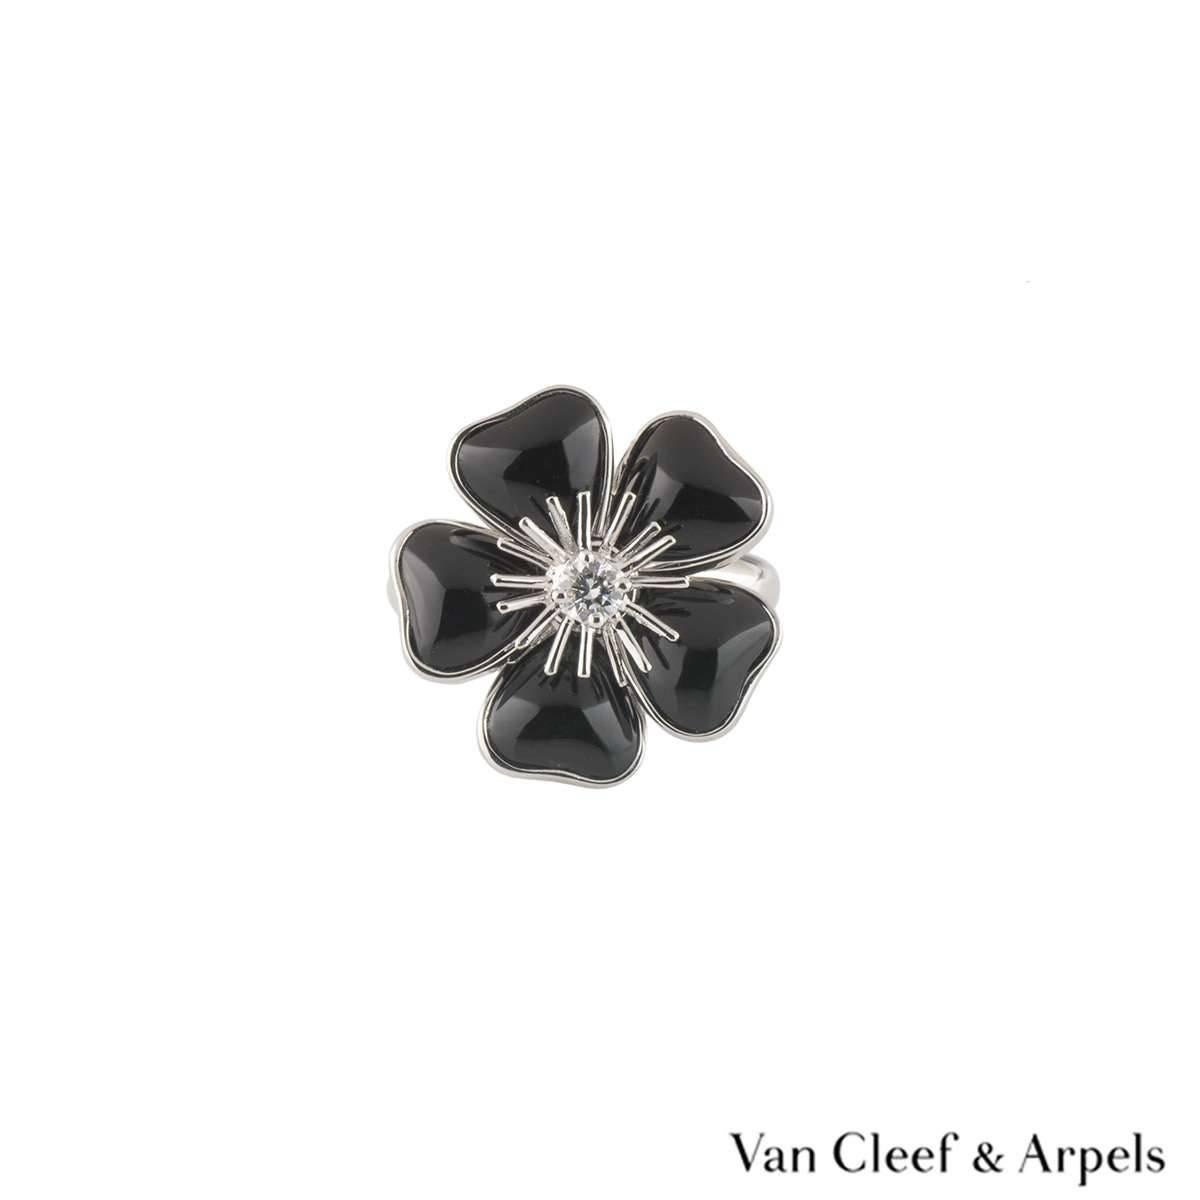 A lovely 18k white gold diamond and onyx Van Cleef & Arpels ring from the Nerval collection. The ring comprises of a flower motif with onyx placed in each petal. The center of the flower has a round brilliant cut diamond in a claw setting, with a